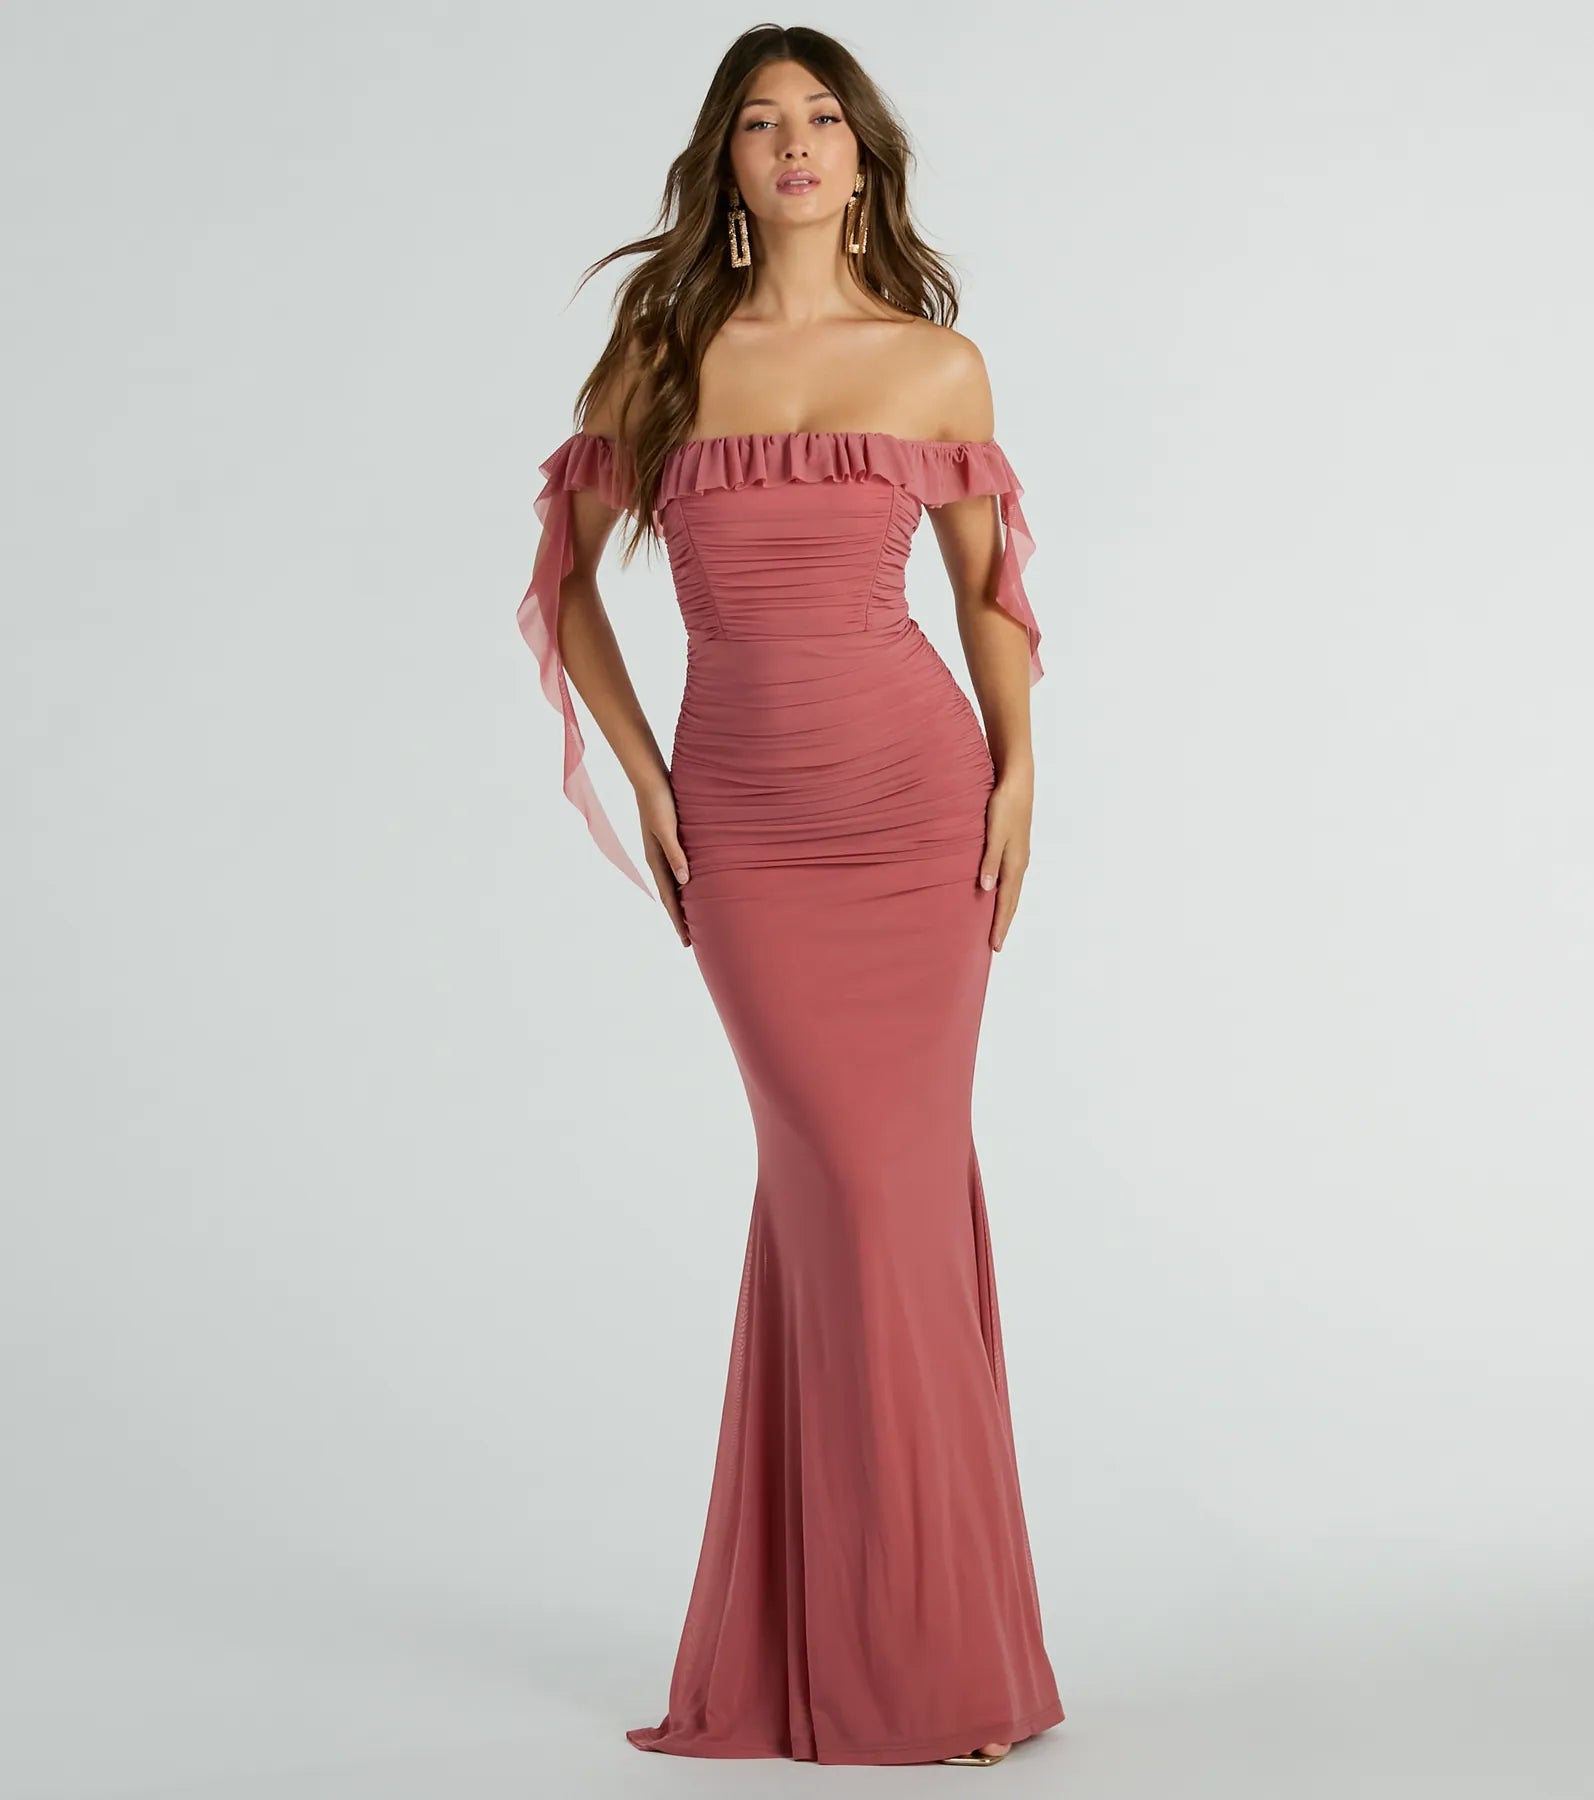 Sexy Sophisticated Mermaid Off the Shoulder Mesh Ruched Stretchy Knit Maxi Dress With Ruffles